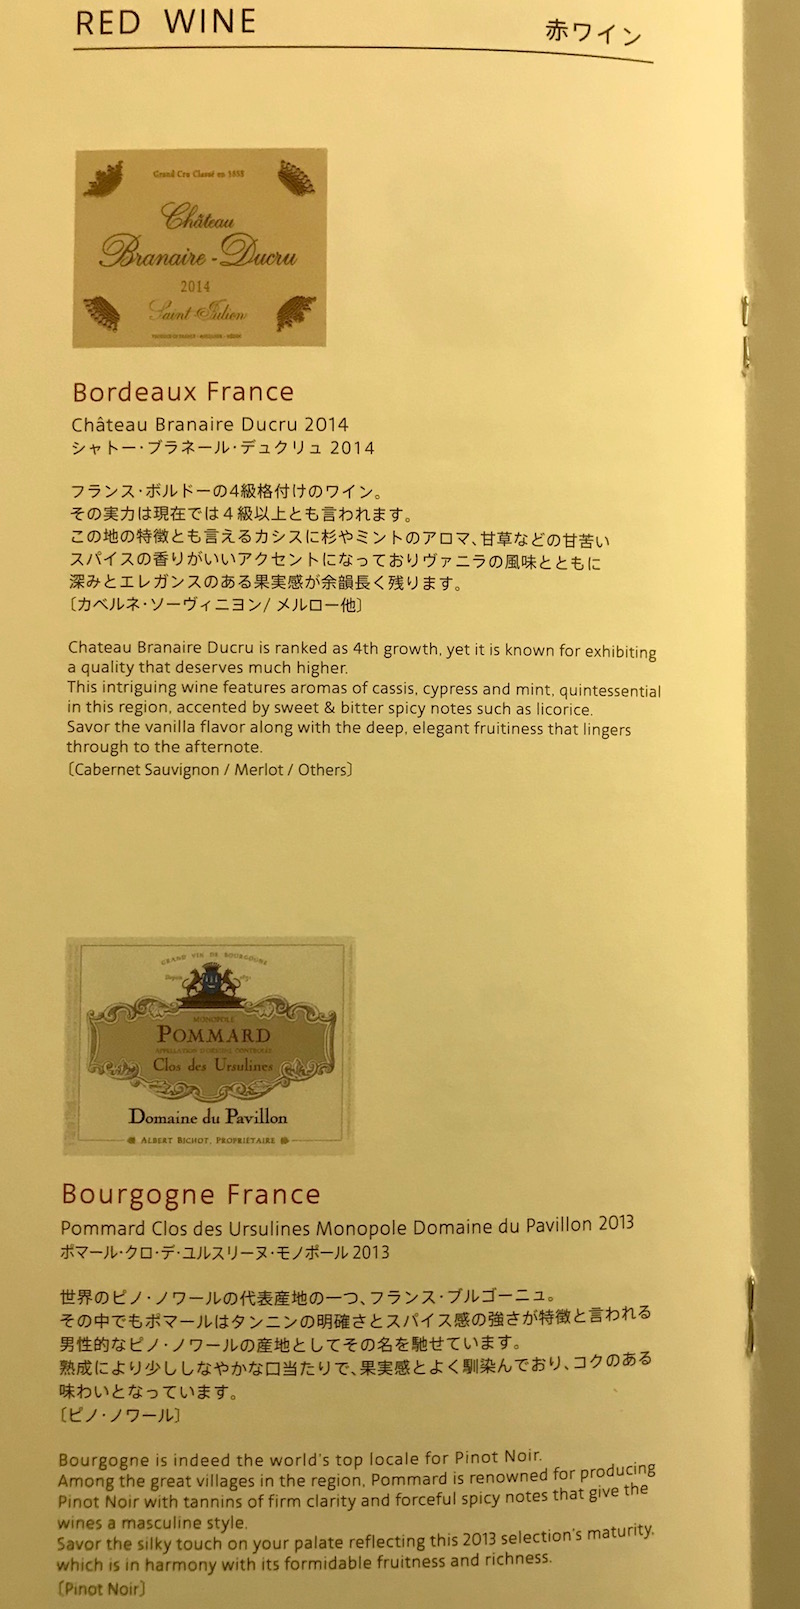 Japan Airlines First Class Menu - Beverages